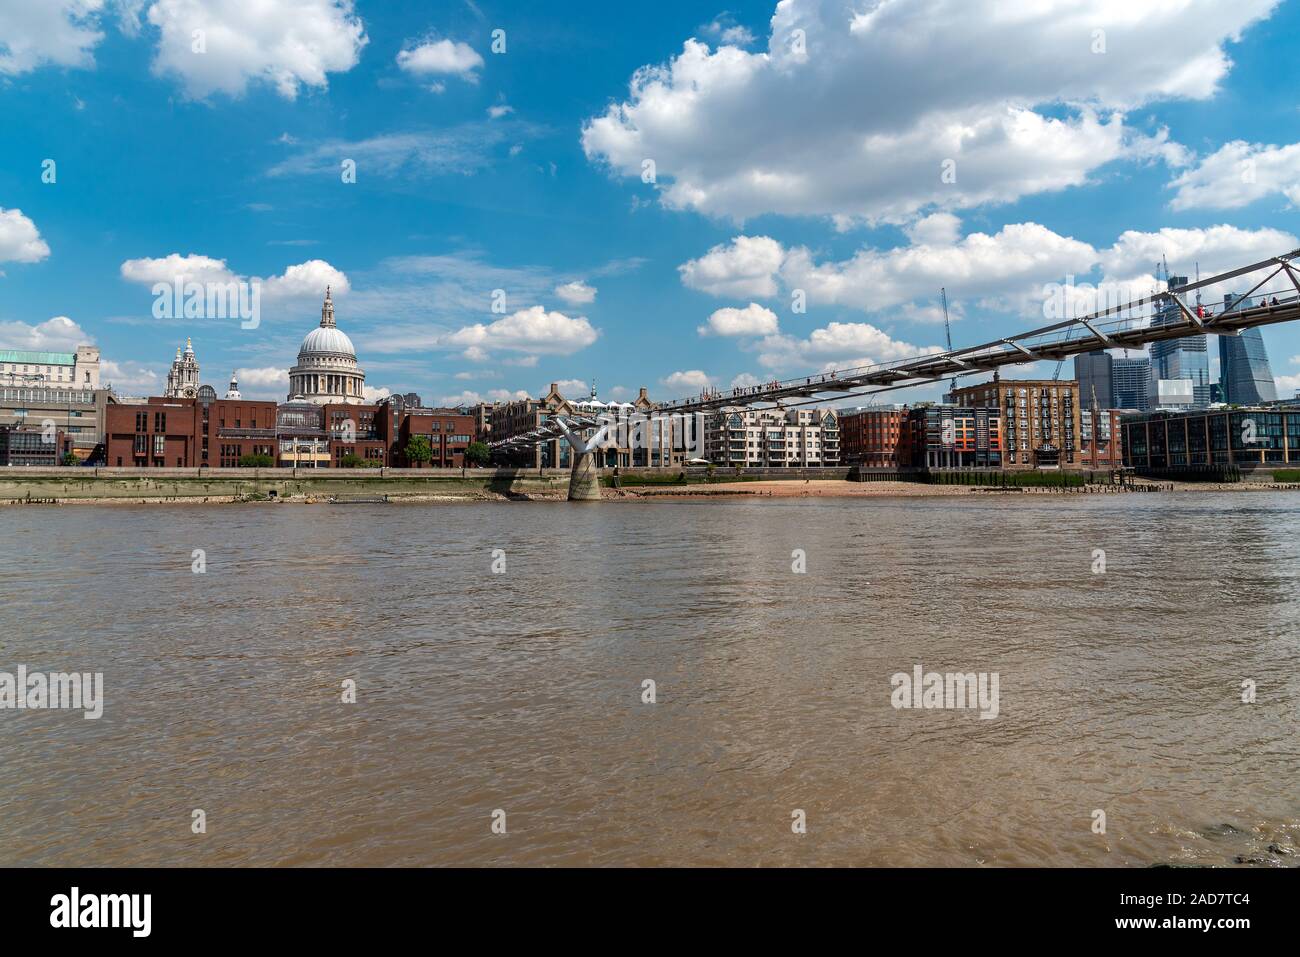 The river Thames, the Millennium Bridge and the St. Paul's Cathedral in London on a sunny day Stock Photo